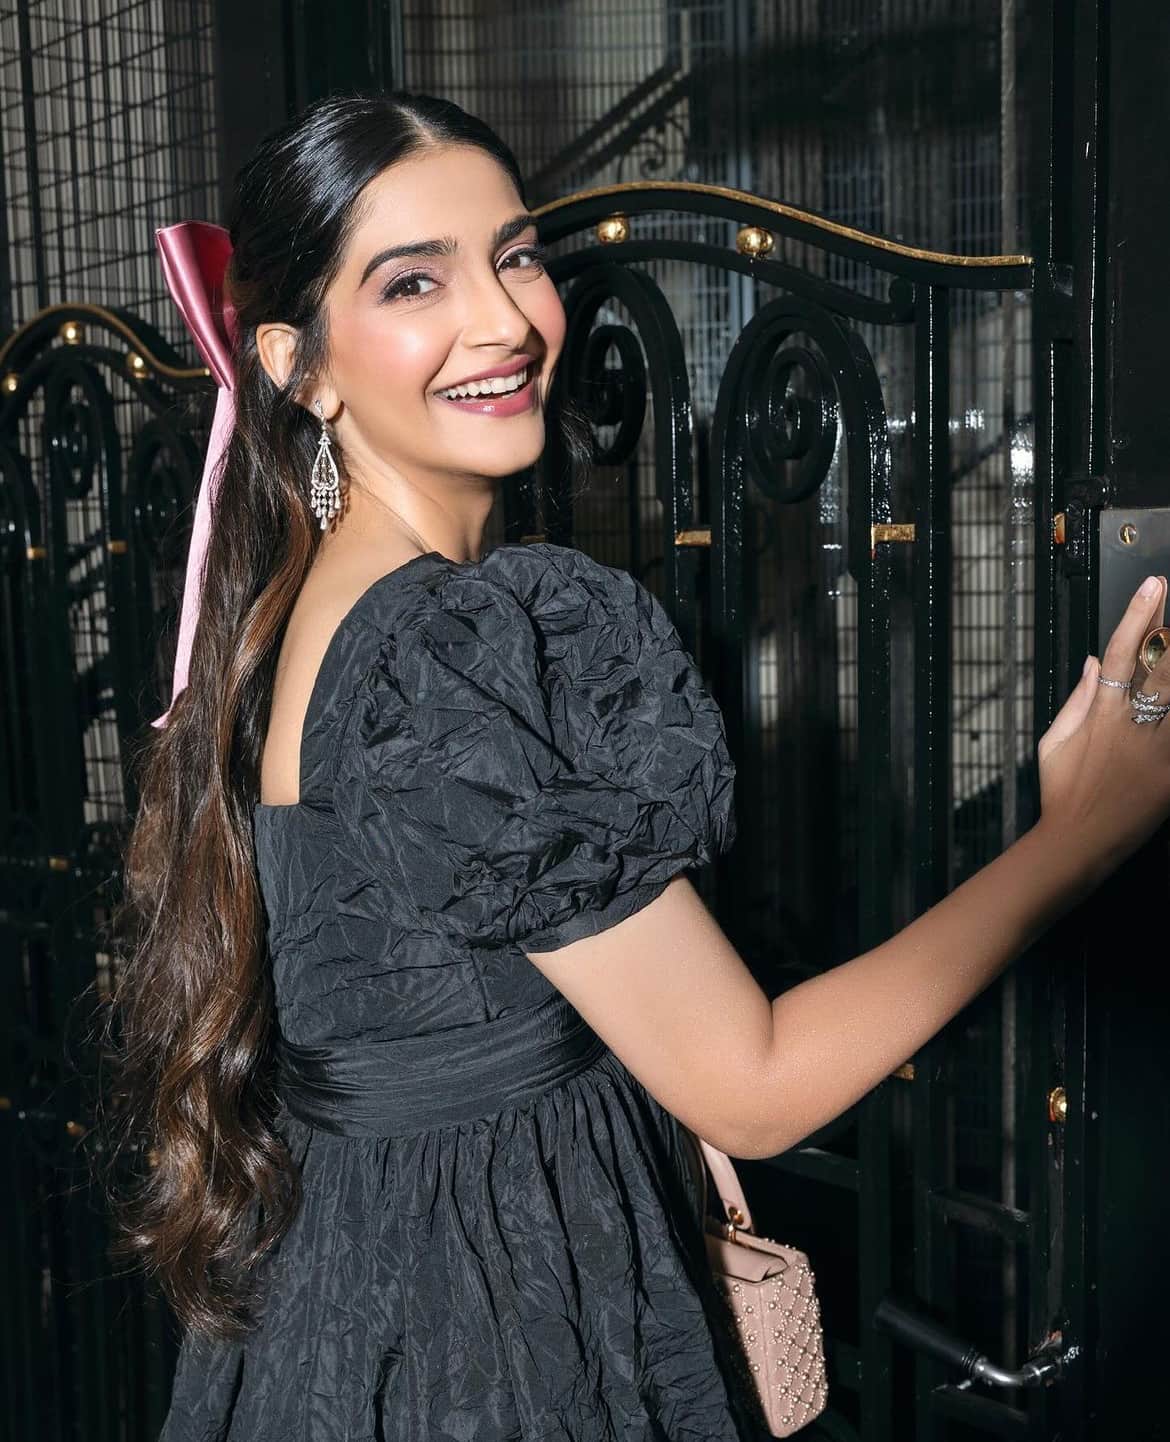 Sonam Kapoor Dress: Sonam Kapoor to wear 'floor-length gown' at King  Charles III's Coronation Concert: All you need to know - The Economic Times